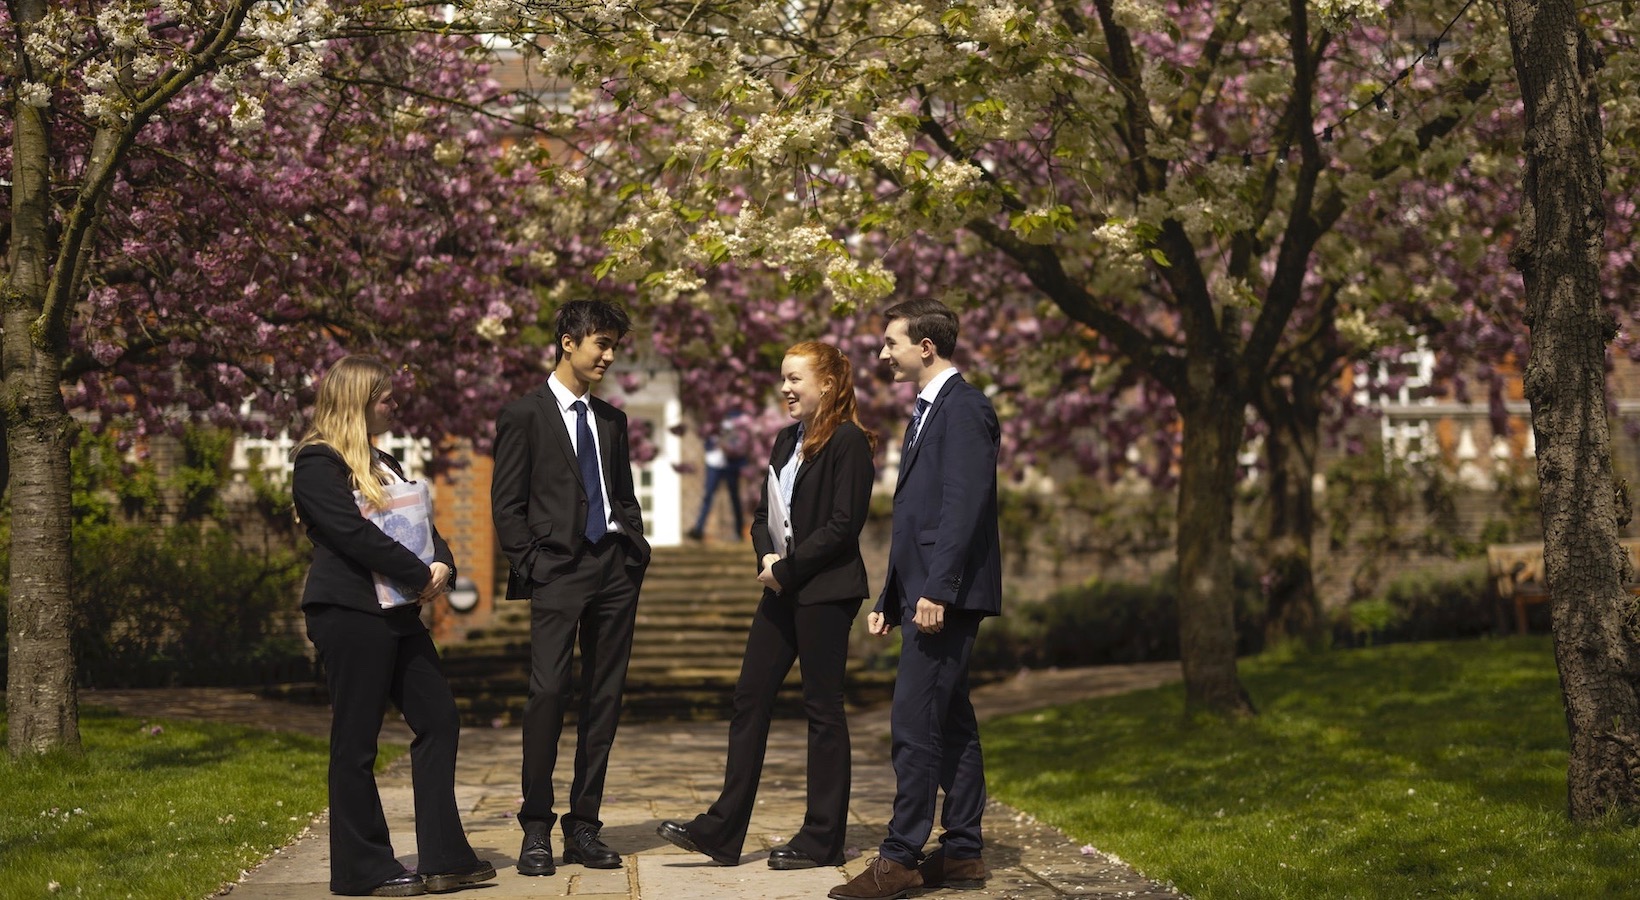 Sixth form pupils walking through the beautiful campus of  Ibstock Place School, a private school near Richmond, Barnes, Putney, Kingston, and Wandsworth.